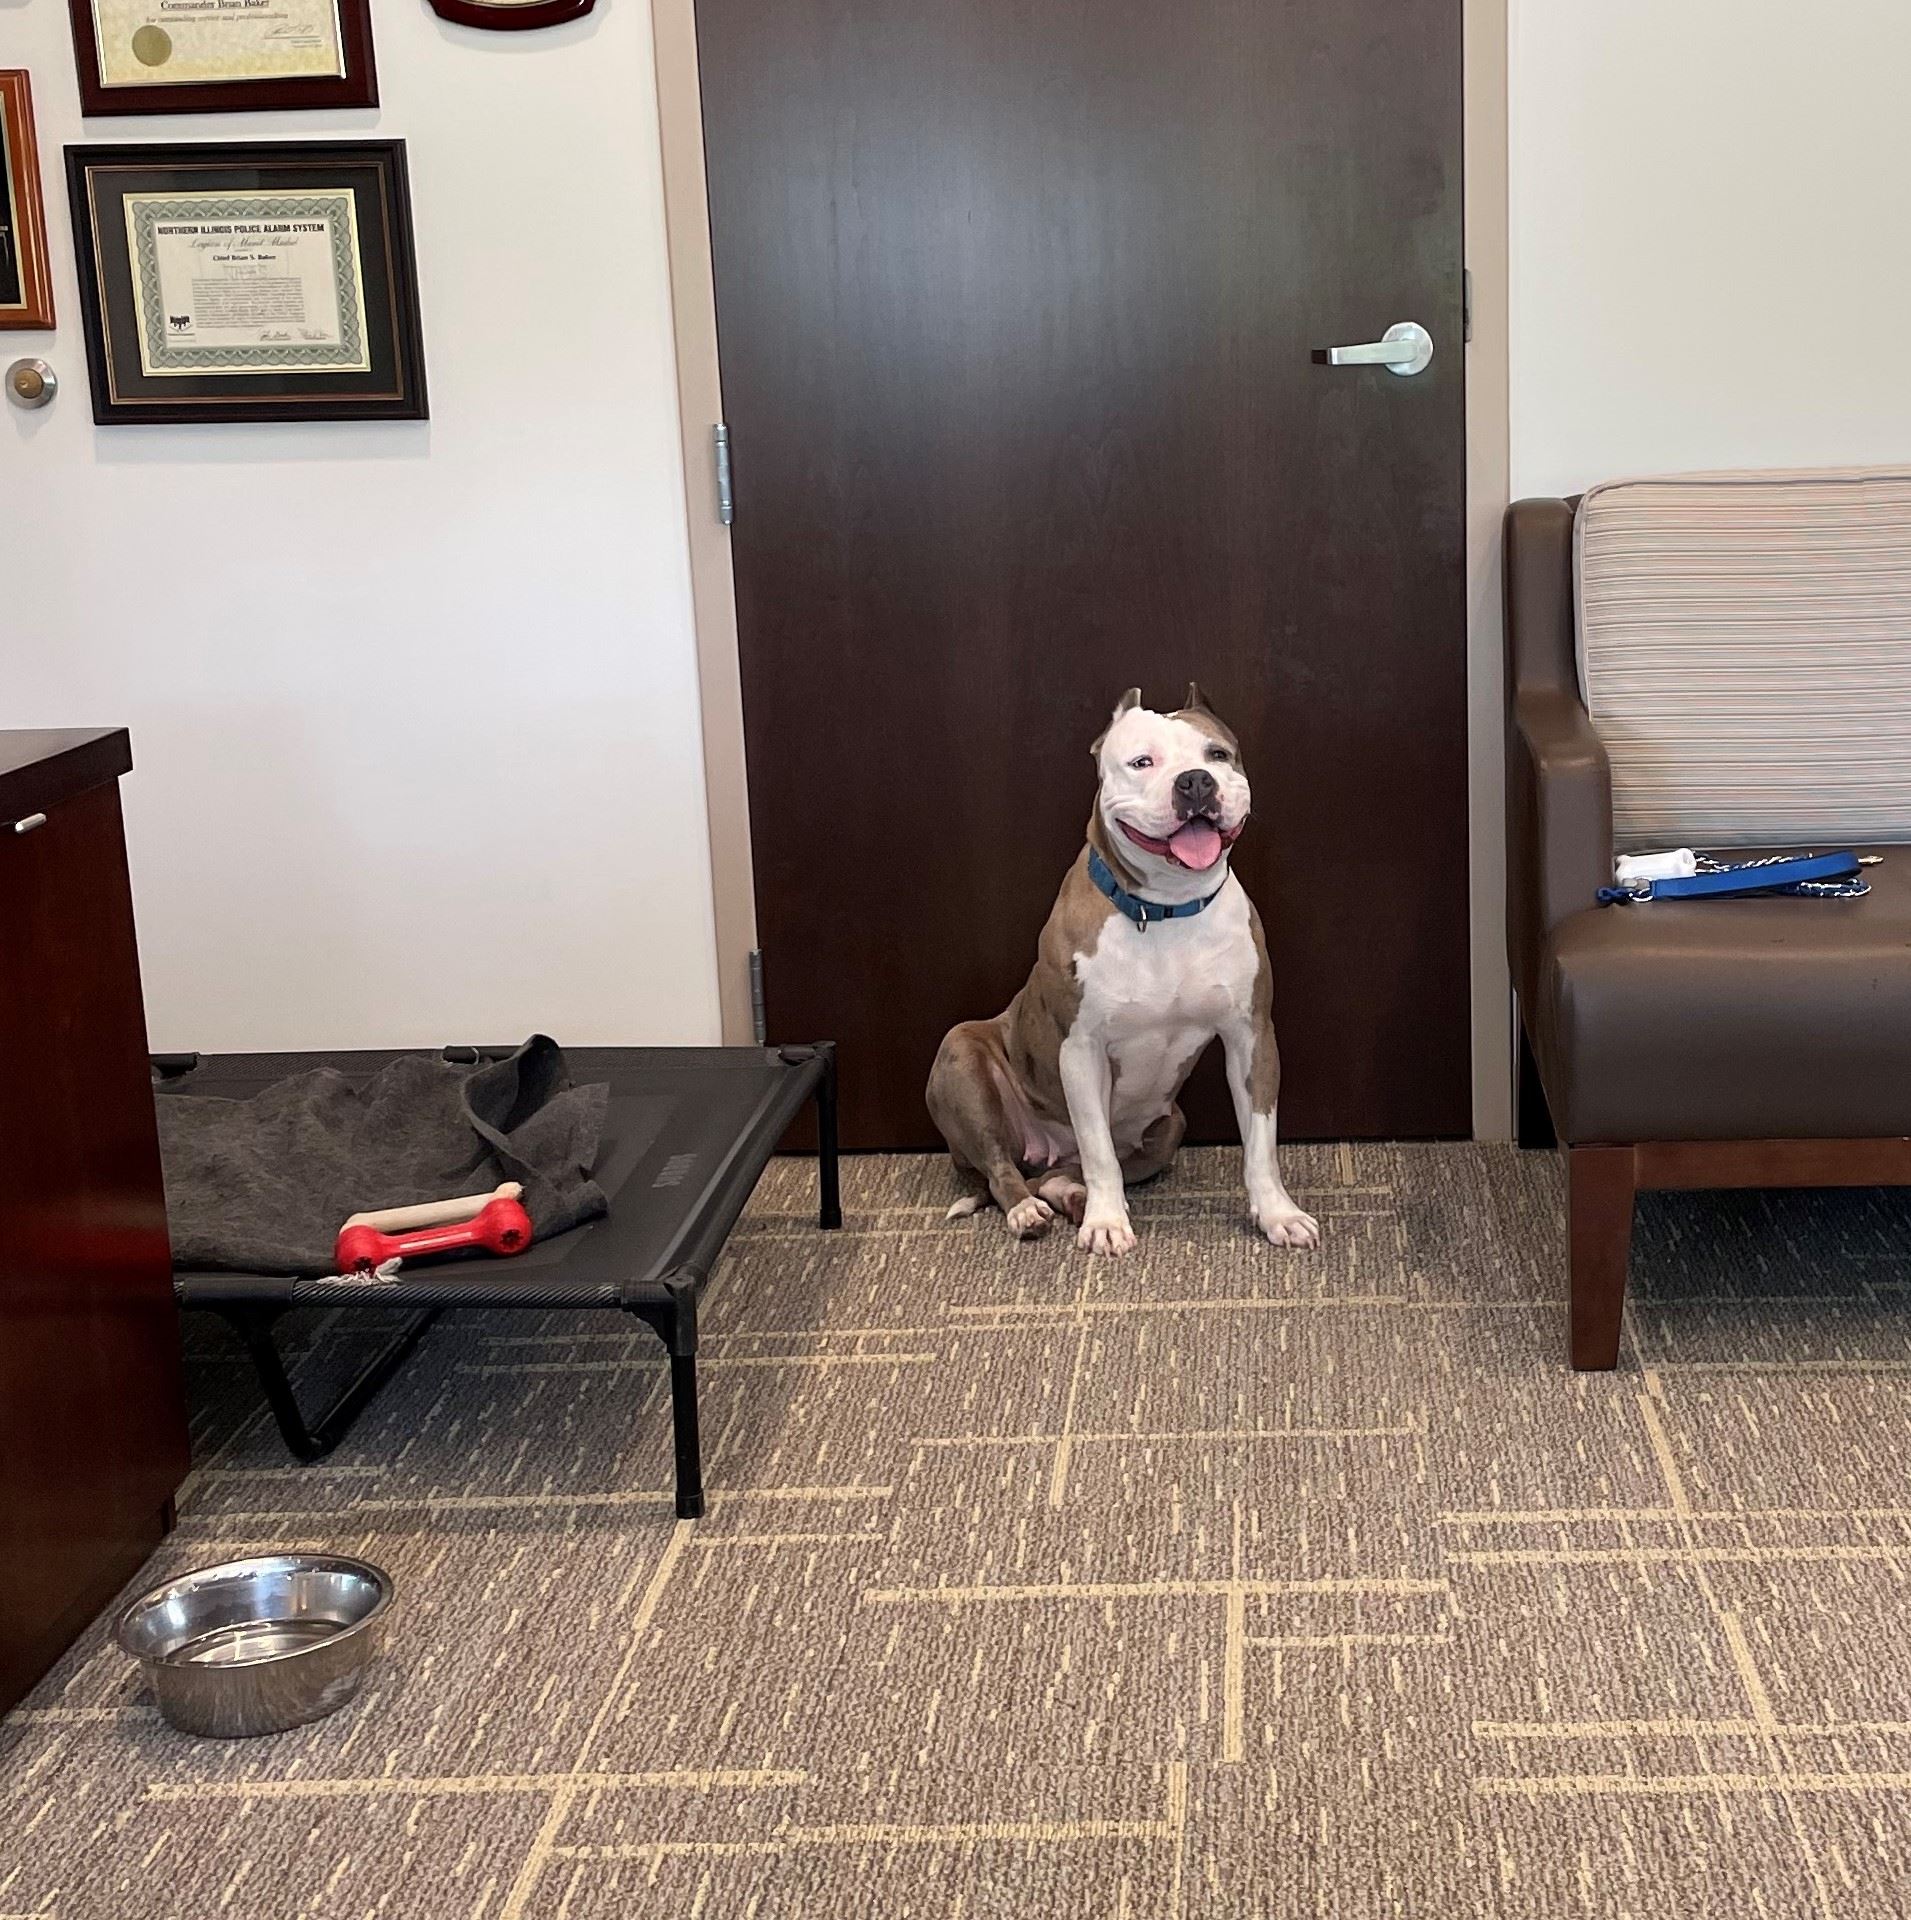 America the Dog in Chief Baker's office